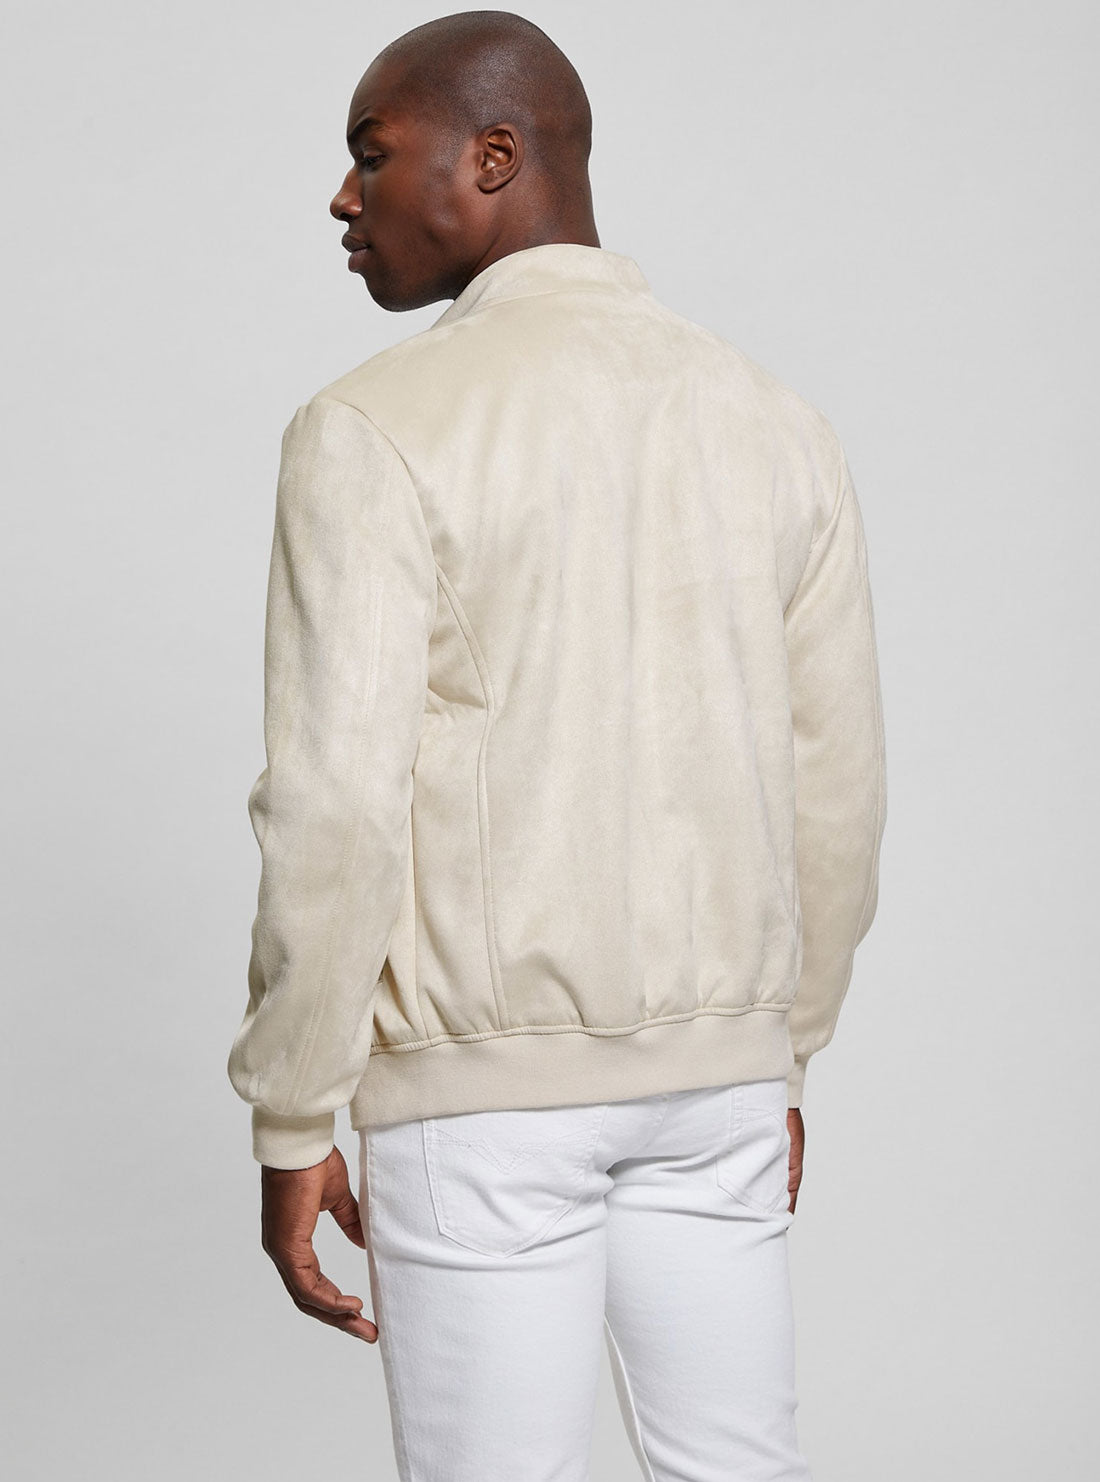 GUESS Cream Soft Suede Jacket back view